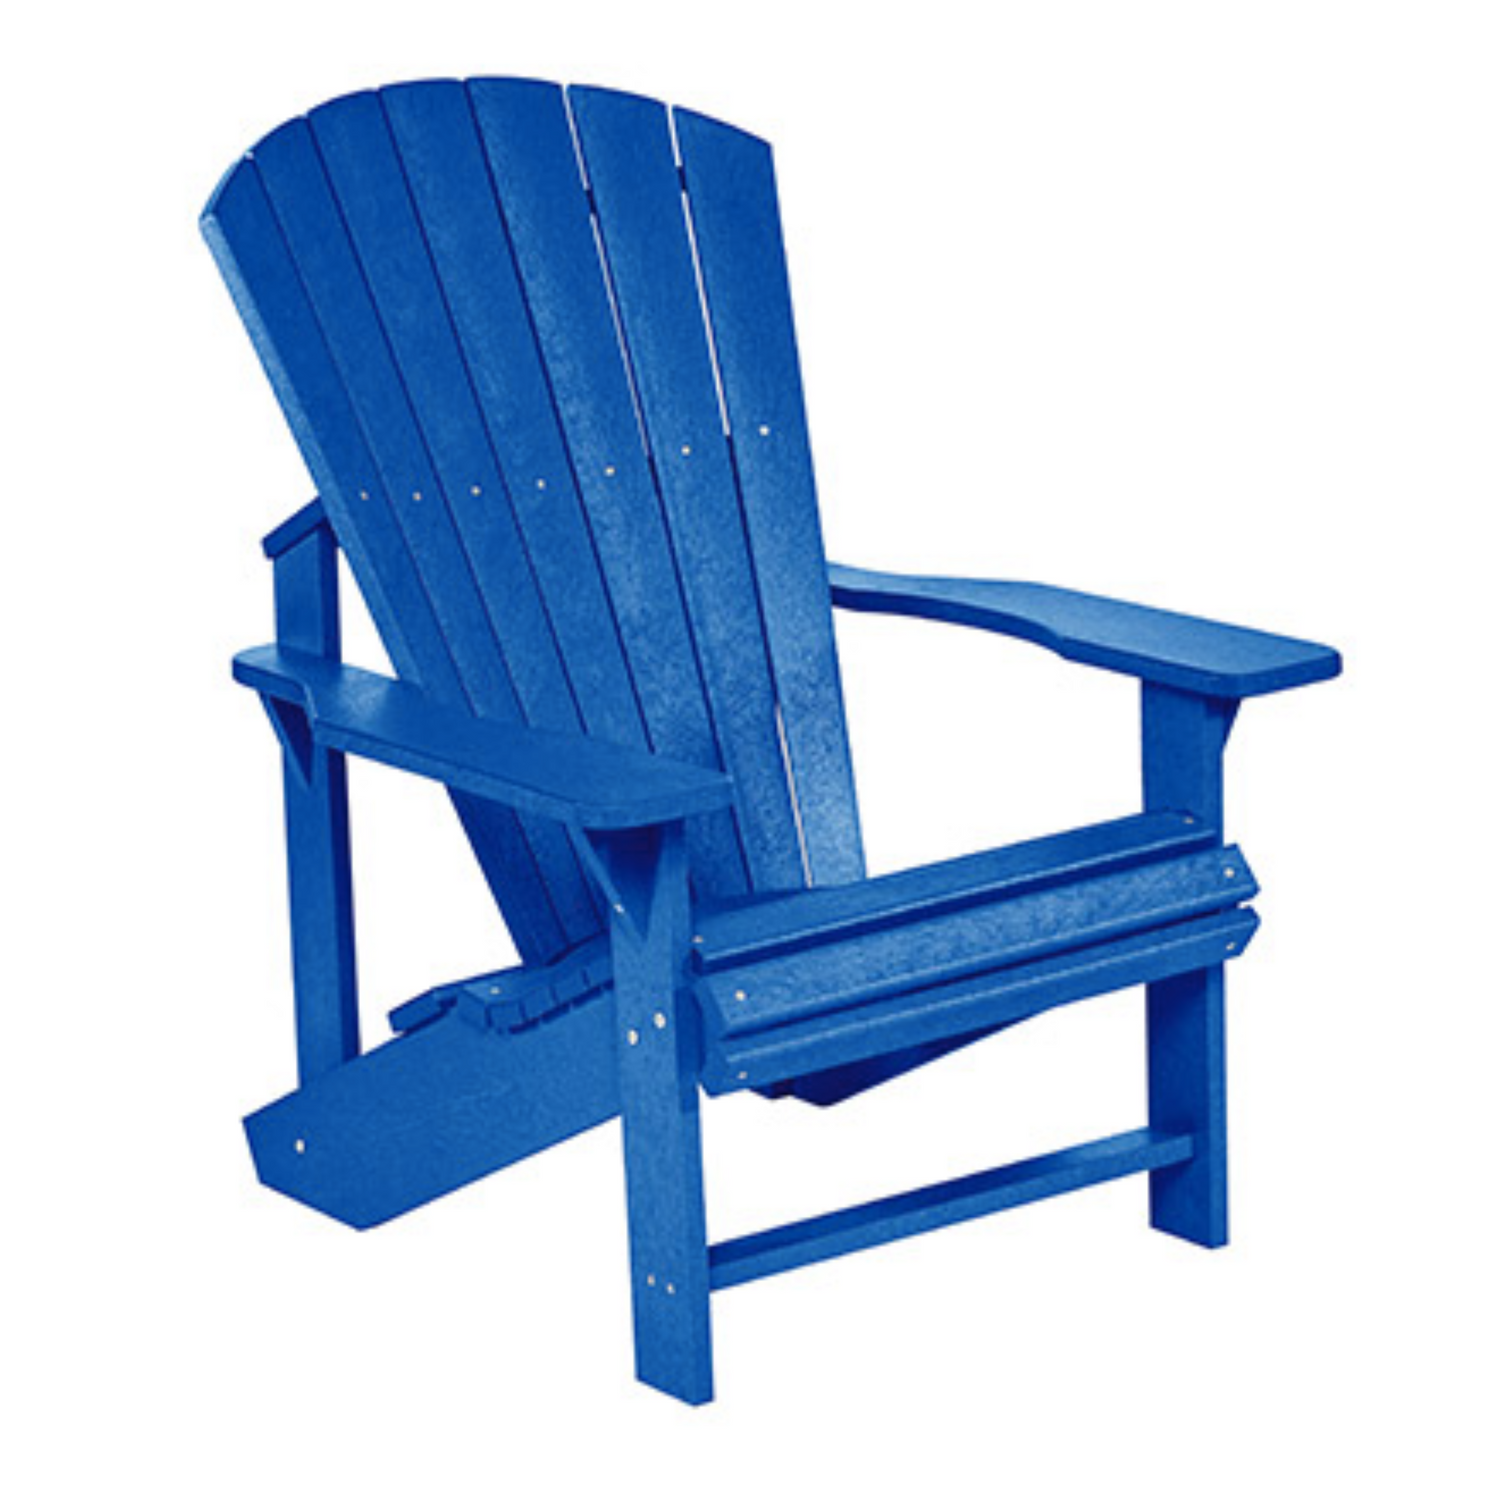 C.R.P. Upright Adirondack Chair In Blue